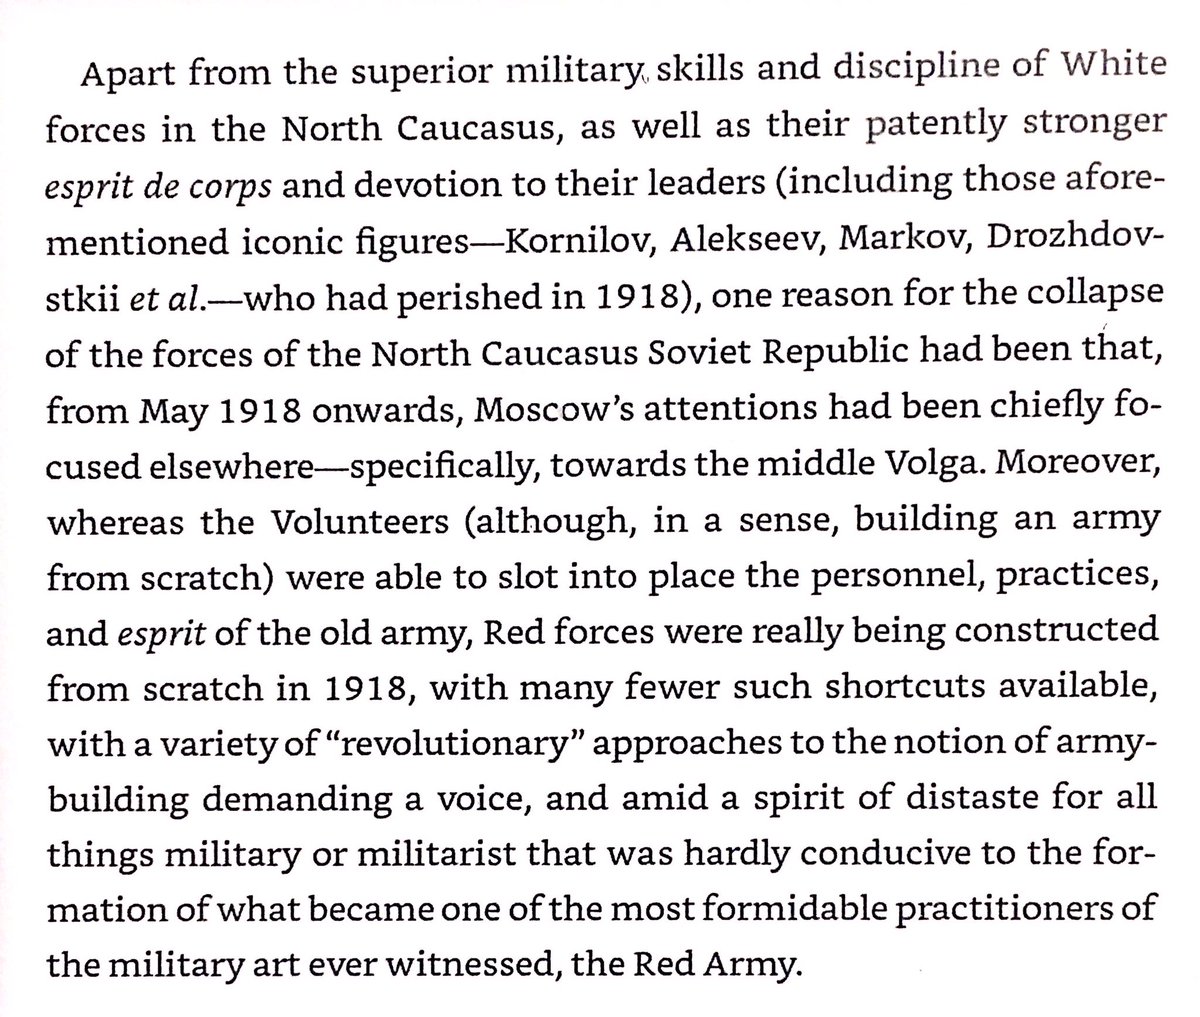 Whites in S Russia allied with Don Cossacks & took most of the region along with E Ukraine March-November 1918, destroying a 120k strong Red force.